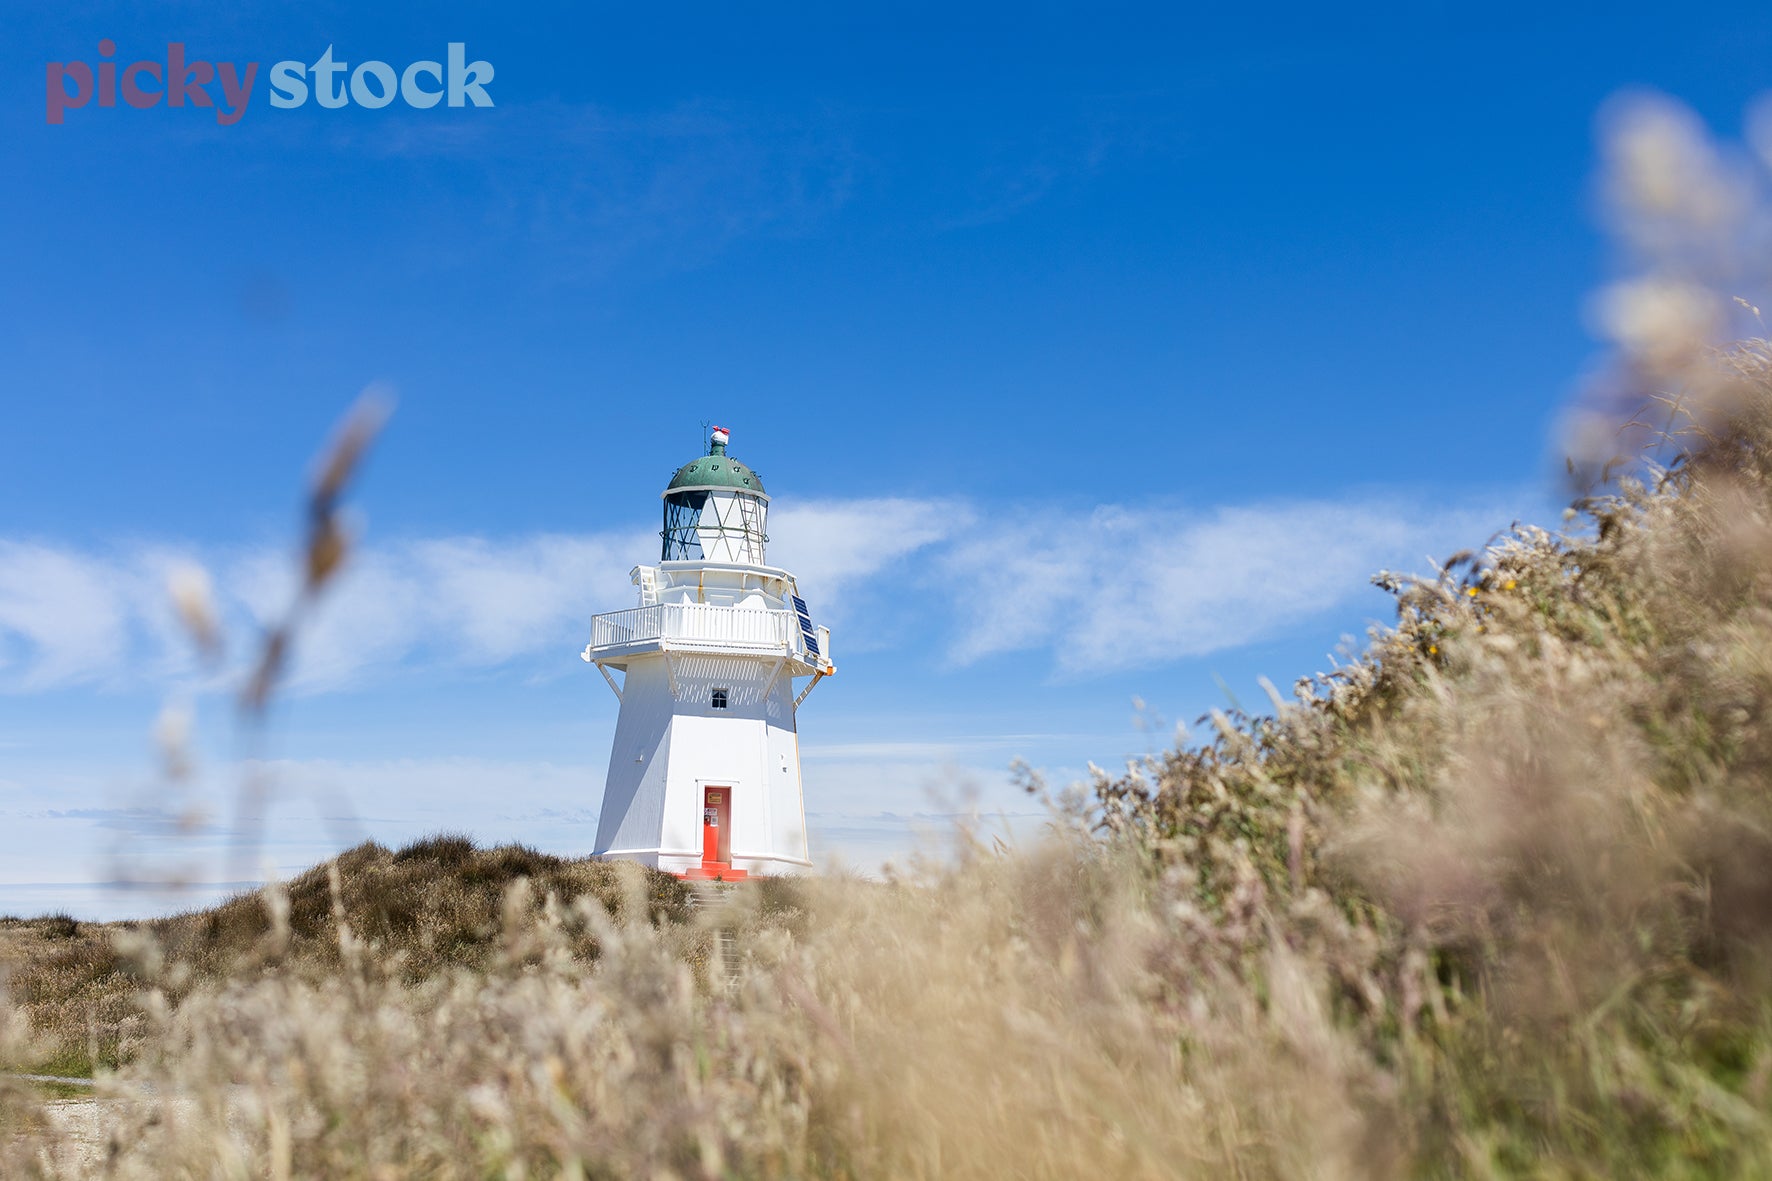 Low angle image looking up at a lighthouse through the dunes and field of bunny tails. Lighthouse is white with red trimming. sky is a bright blue with a little cloud. 
